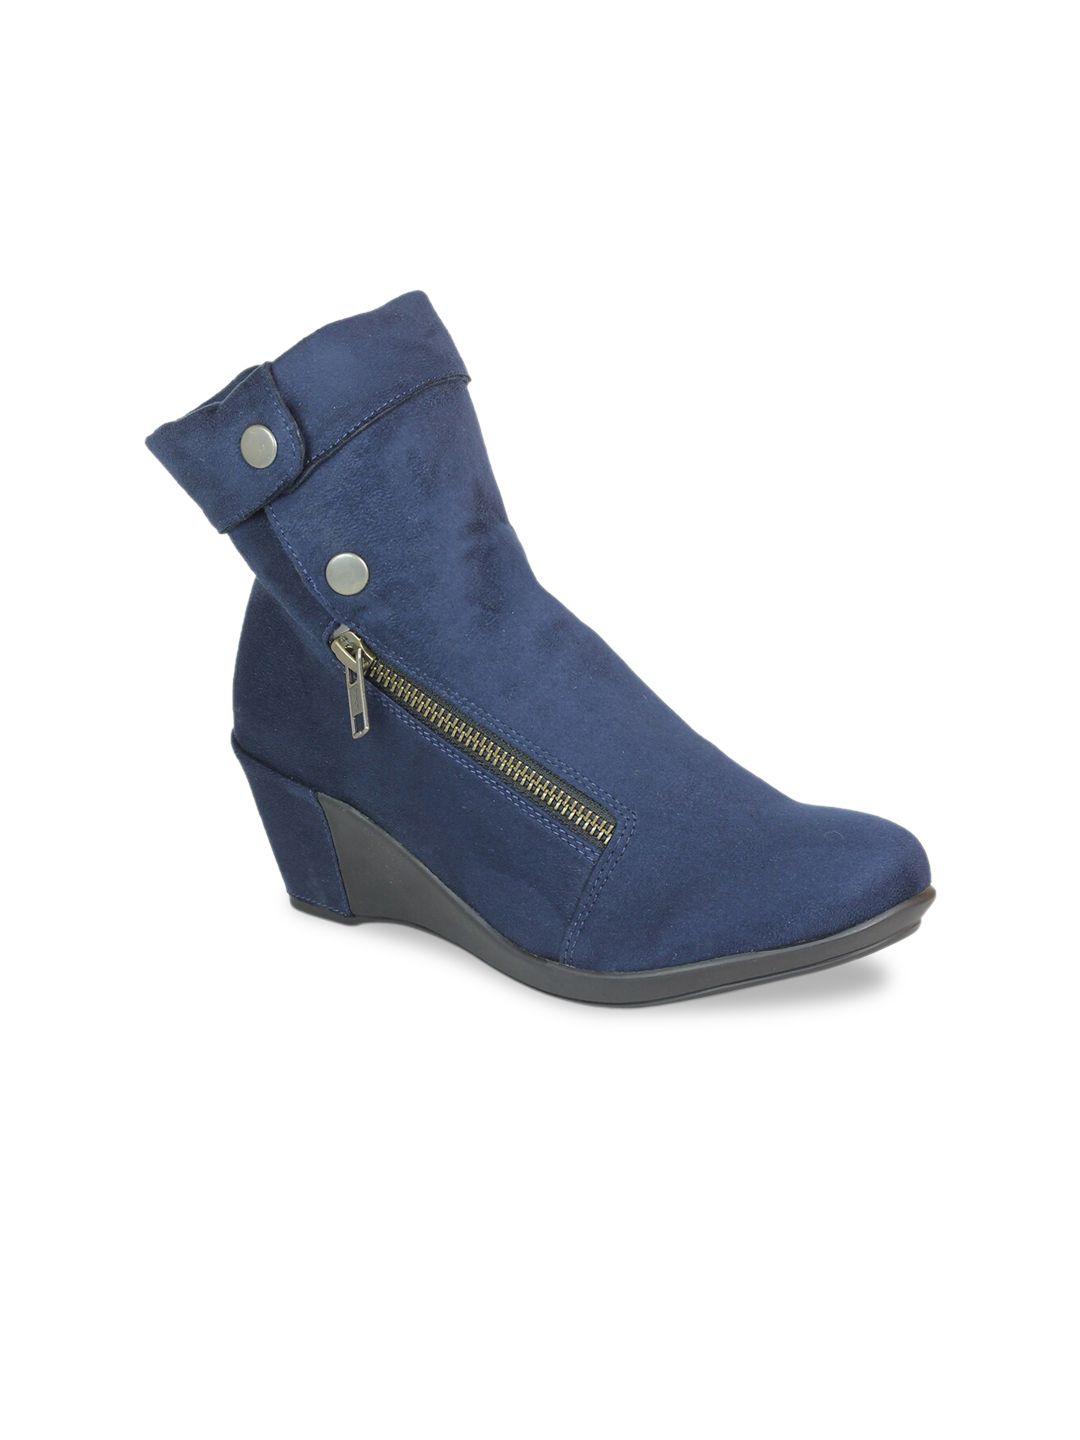 inc 5 women navy blue solid wedge heeled boots